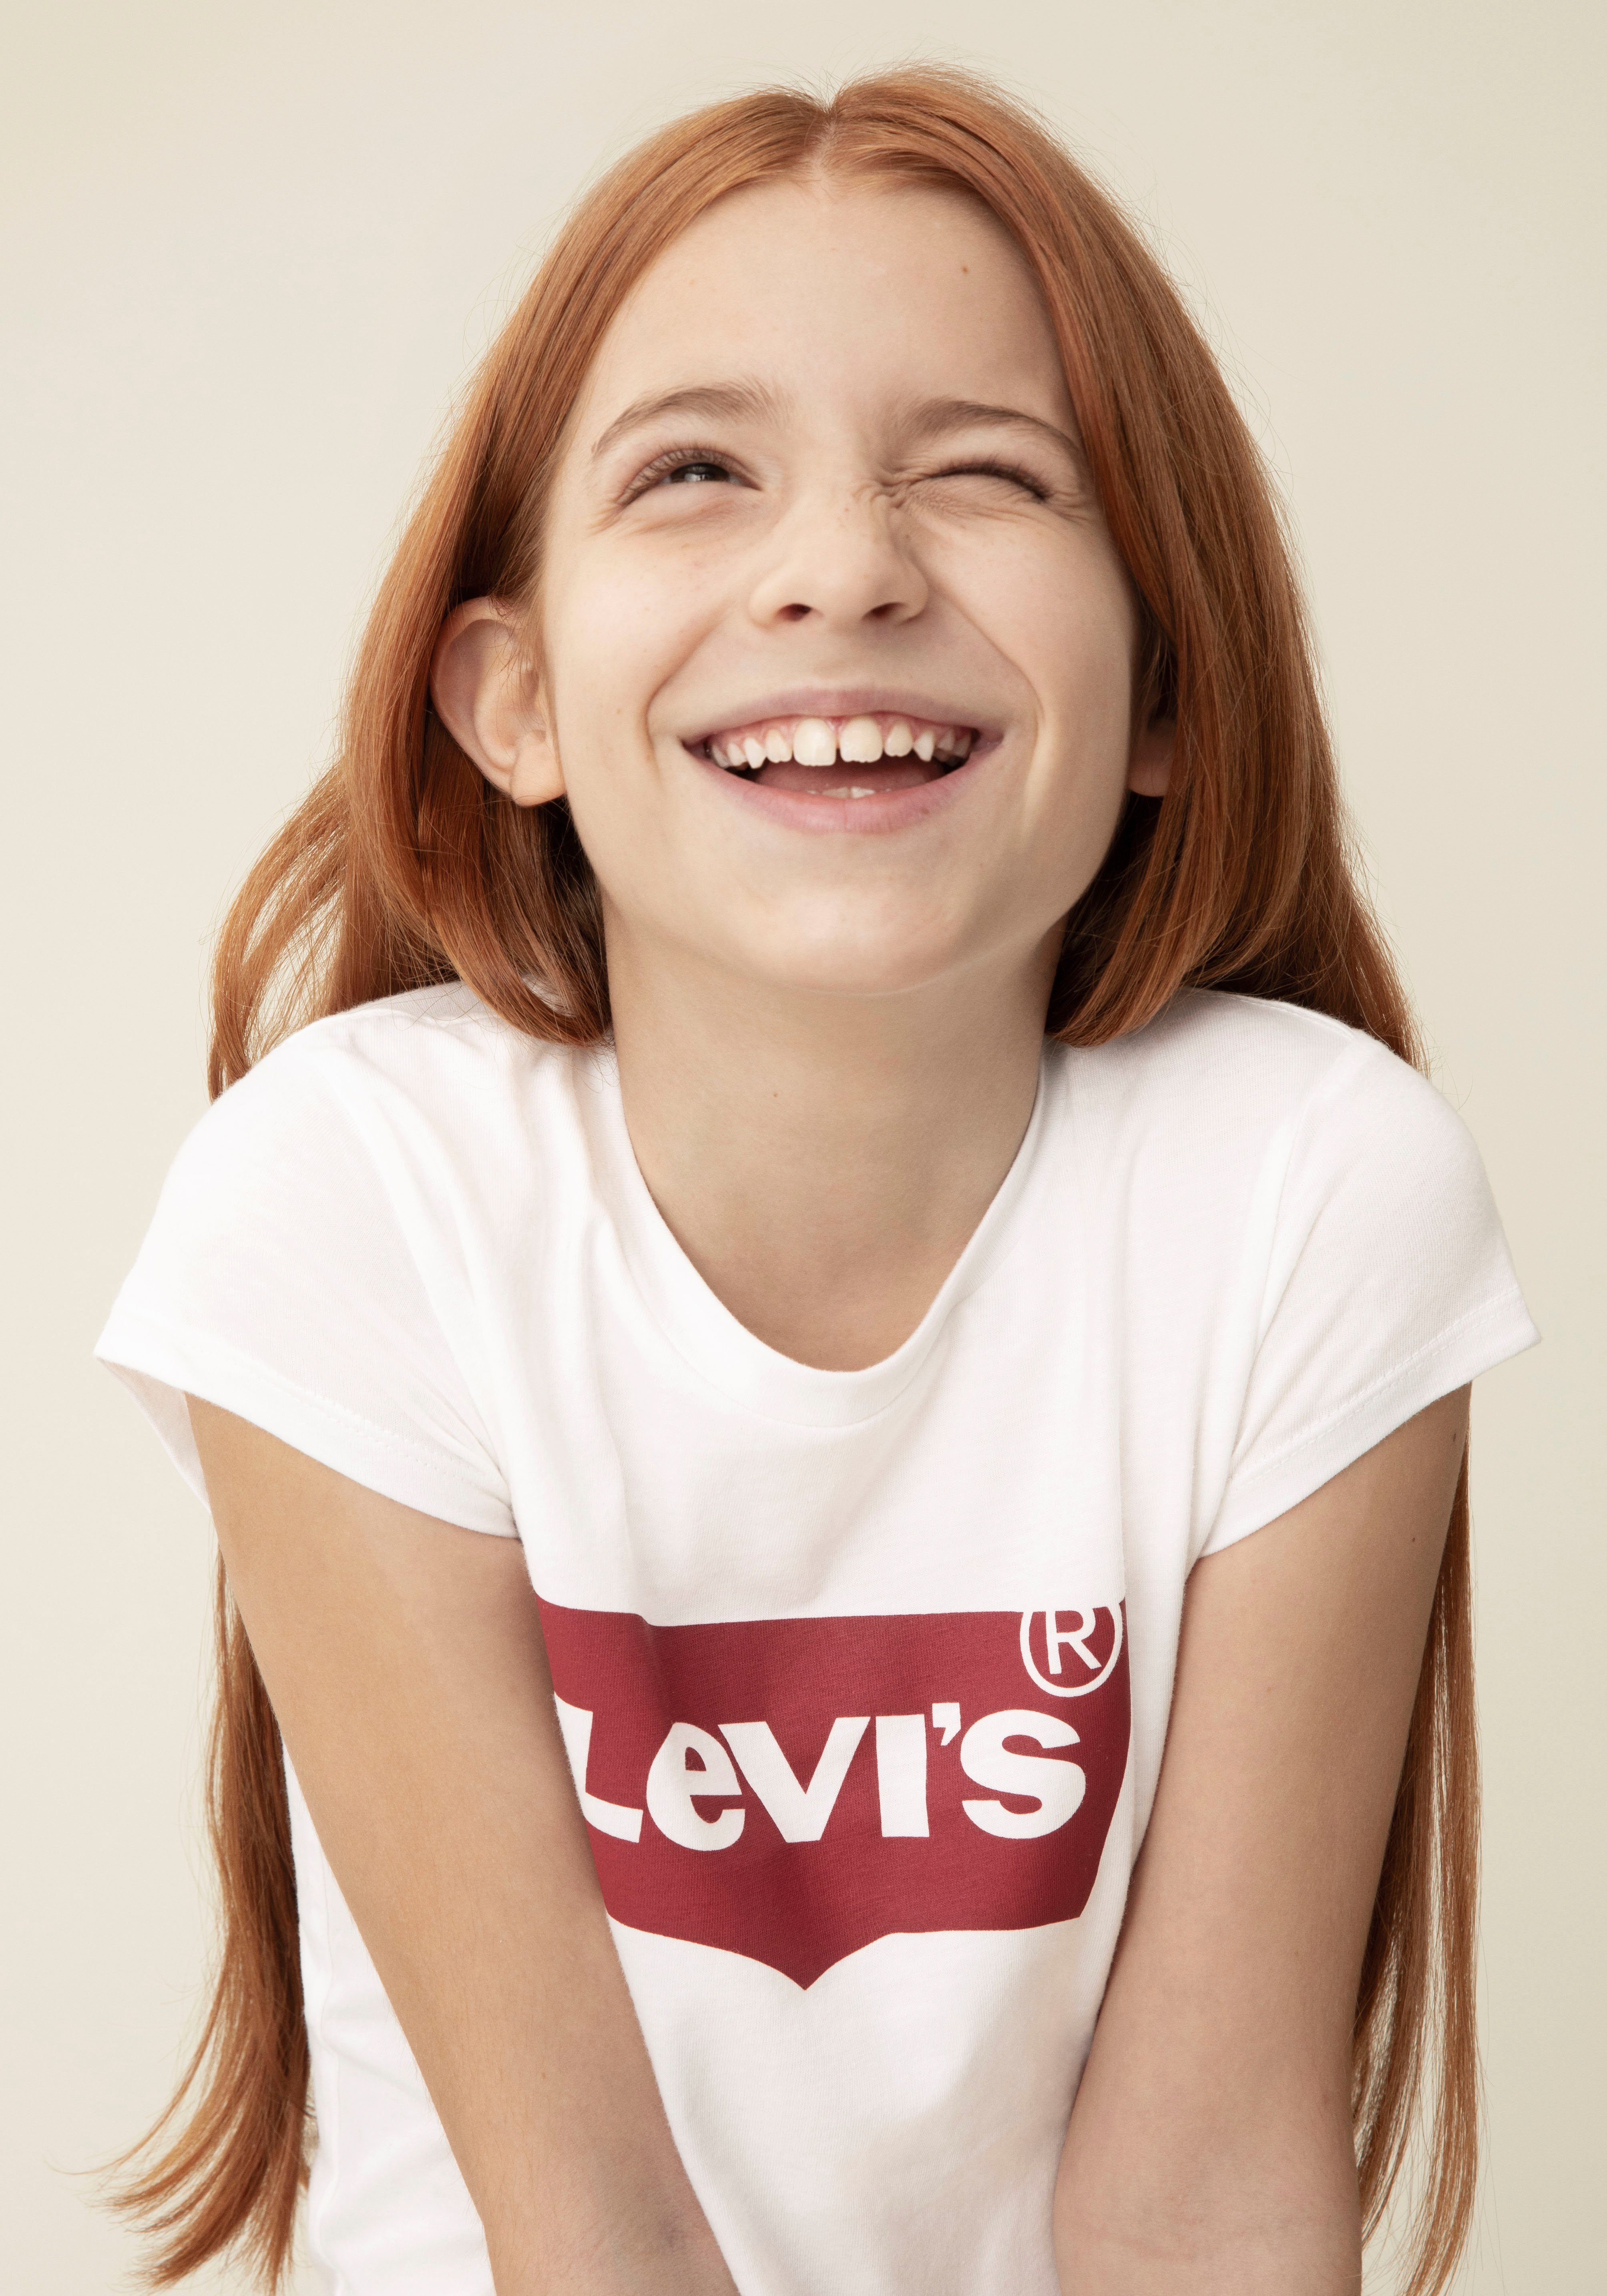 Levi's® Kids T-Shirt BATWING TEE white/red for GIRLS